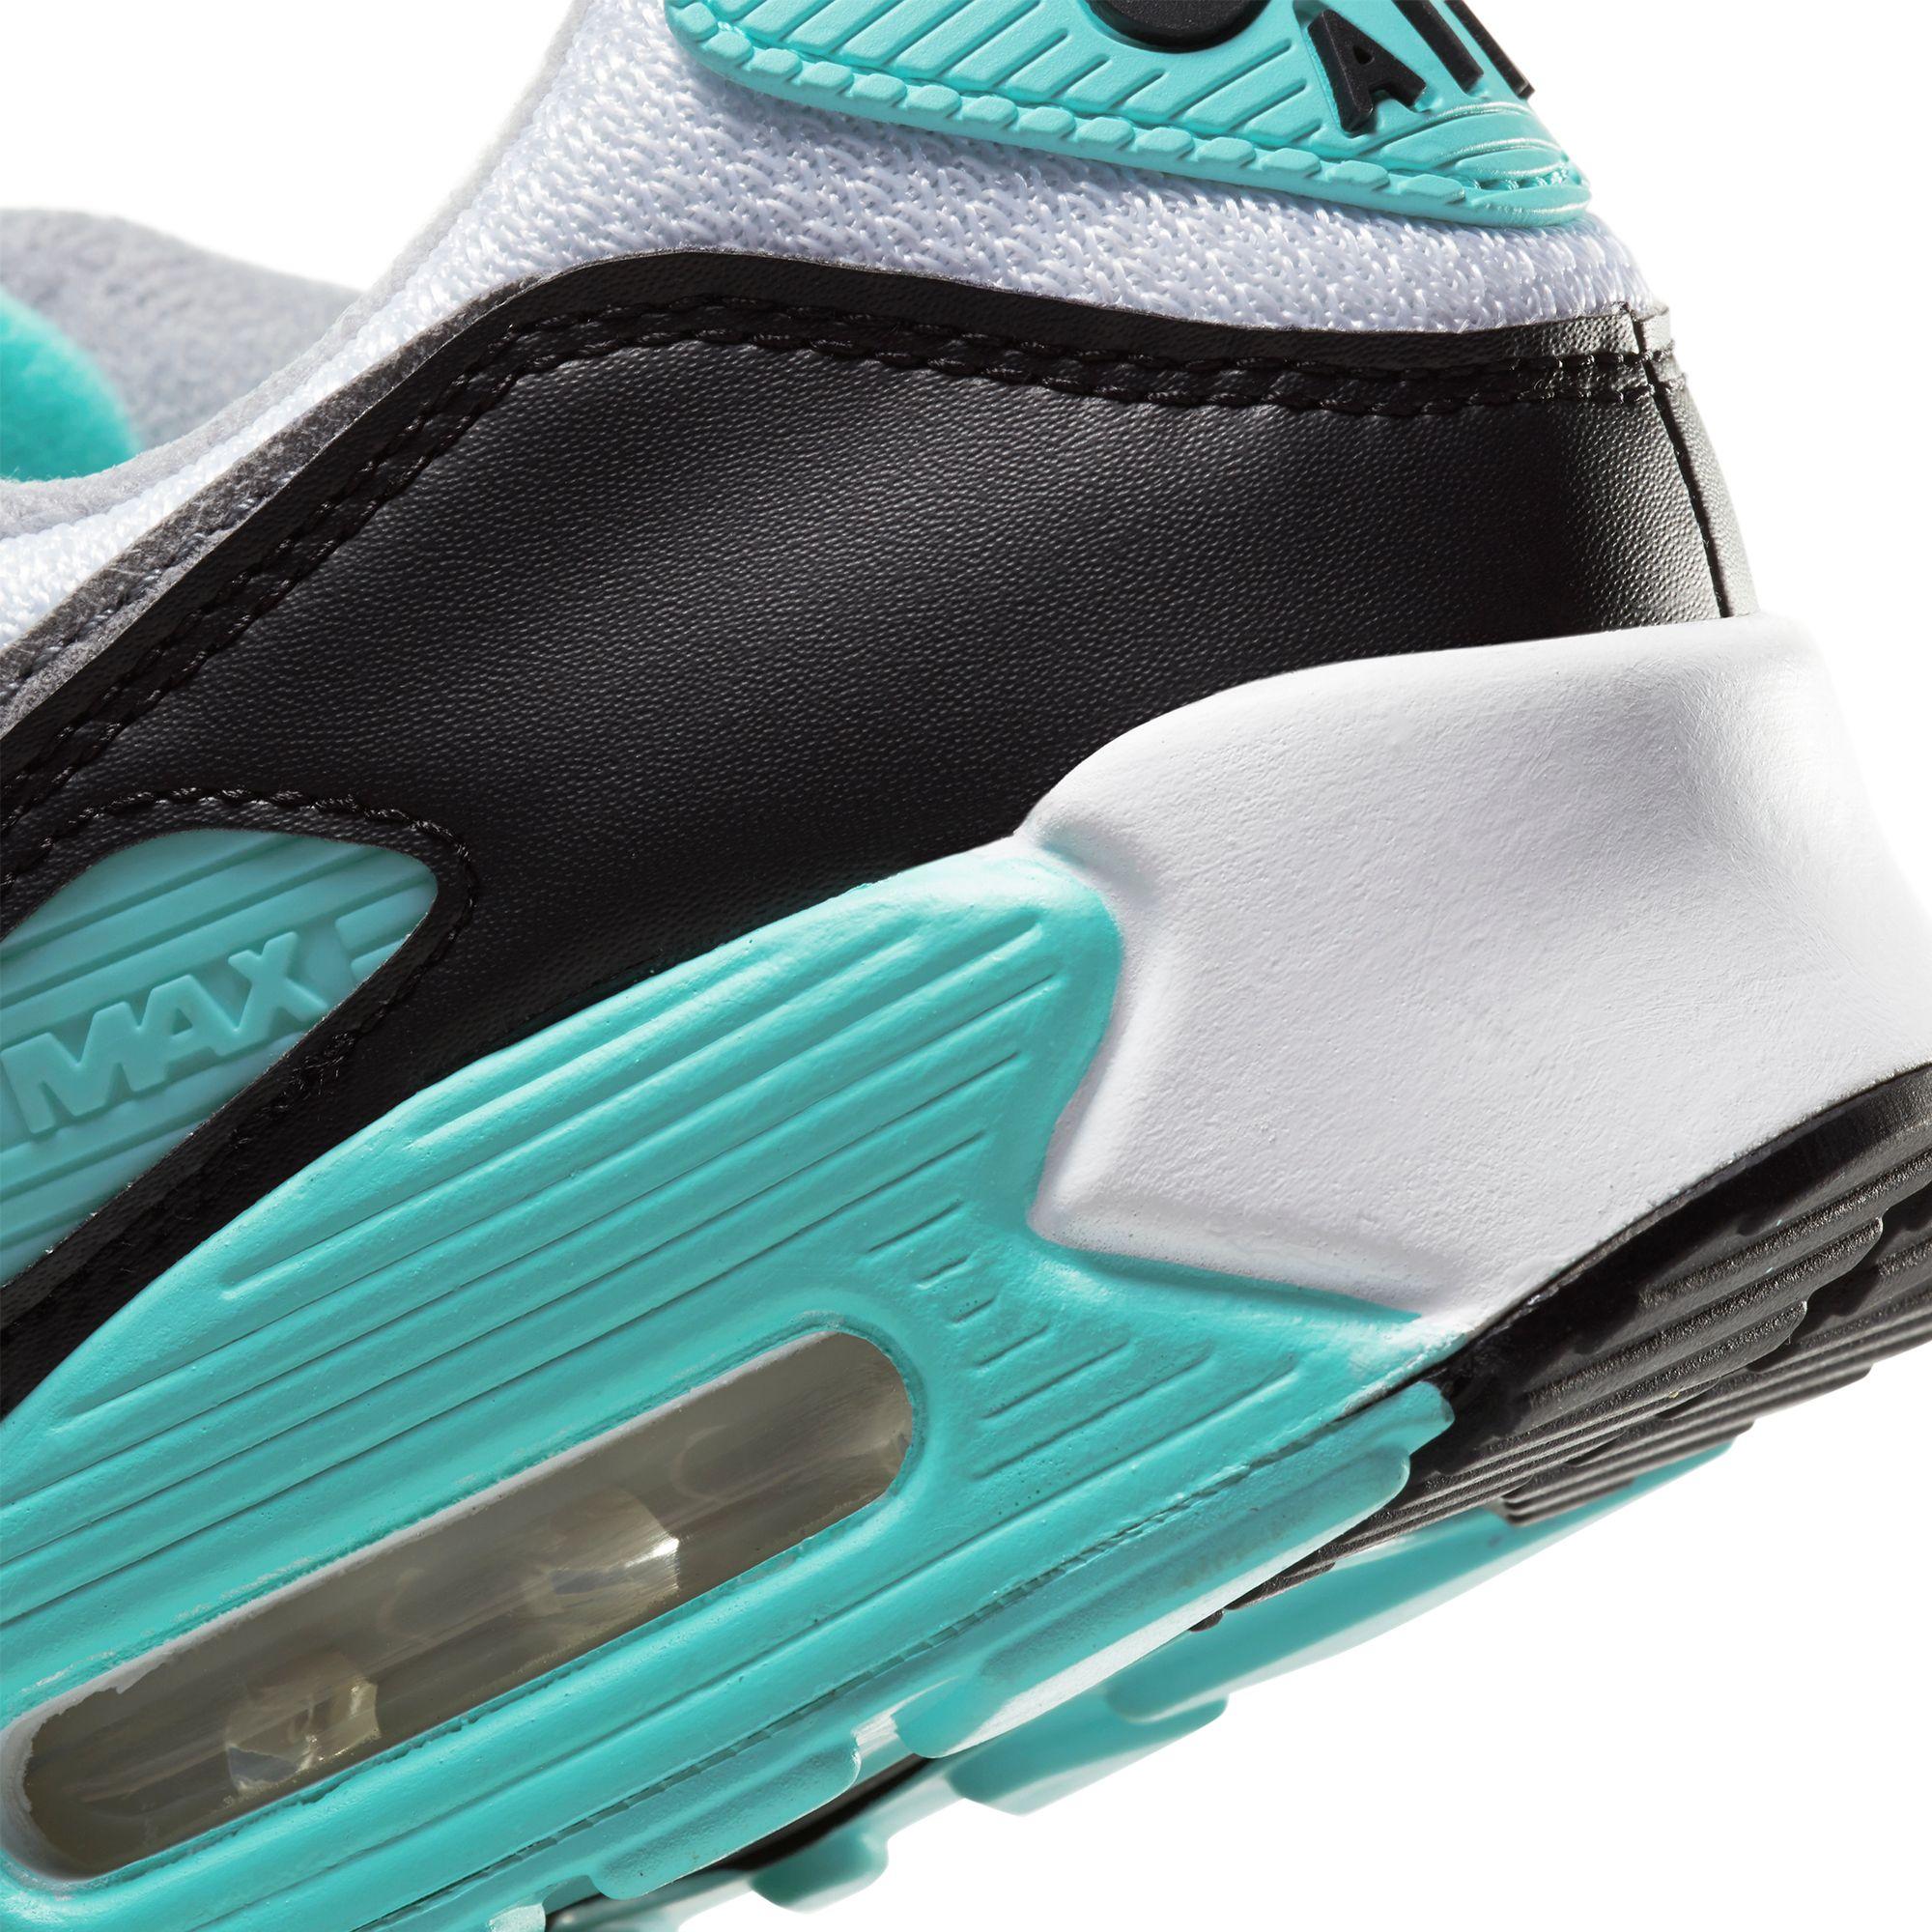 Nike Canvas Air Max 90 Turquoise Shoes for Men - Save 53% - Lyst